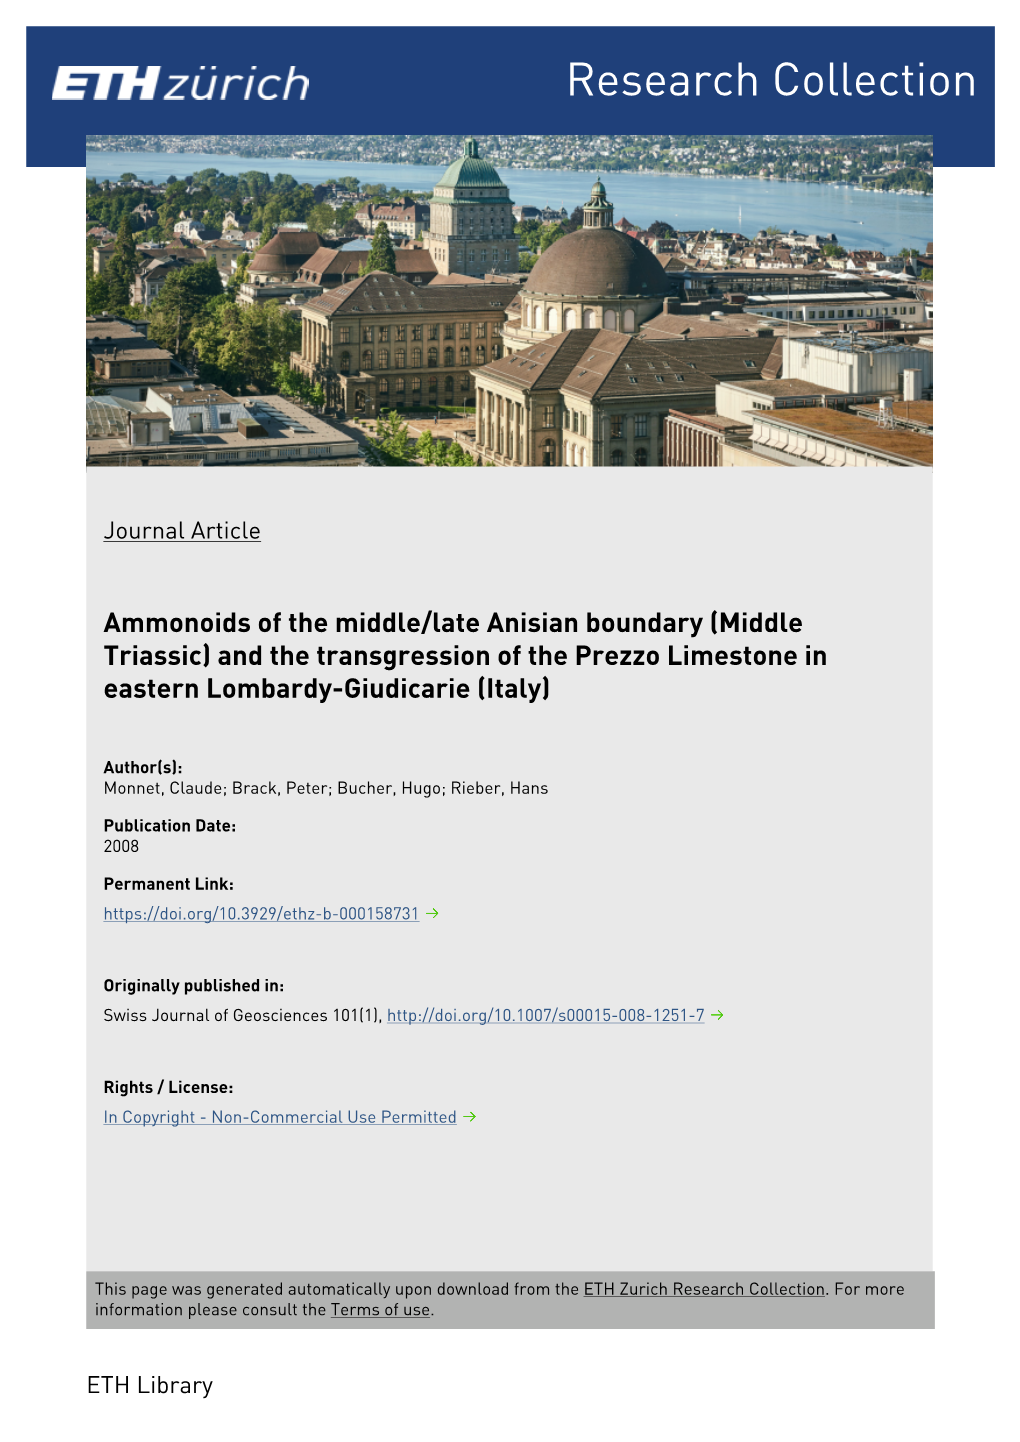 Ammonoids of the Middle/Late Anisian Boundary (Middle Triassic) and the Transgression of the Prezzo Limestone in Eastern Lombardy-Giudicarie (Italy)